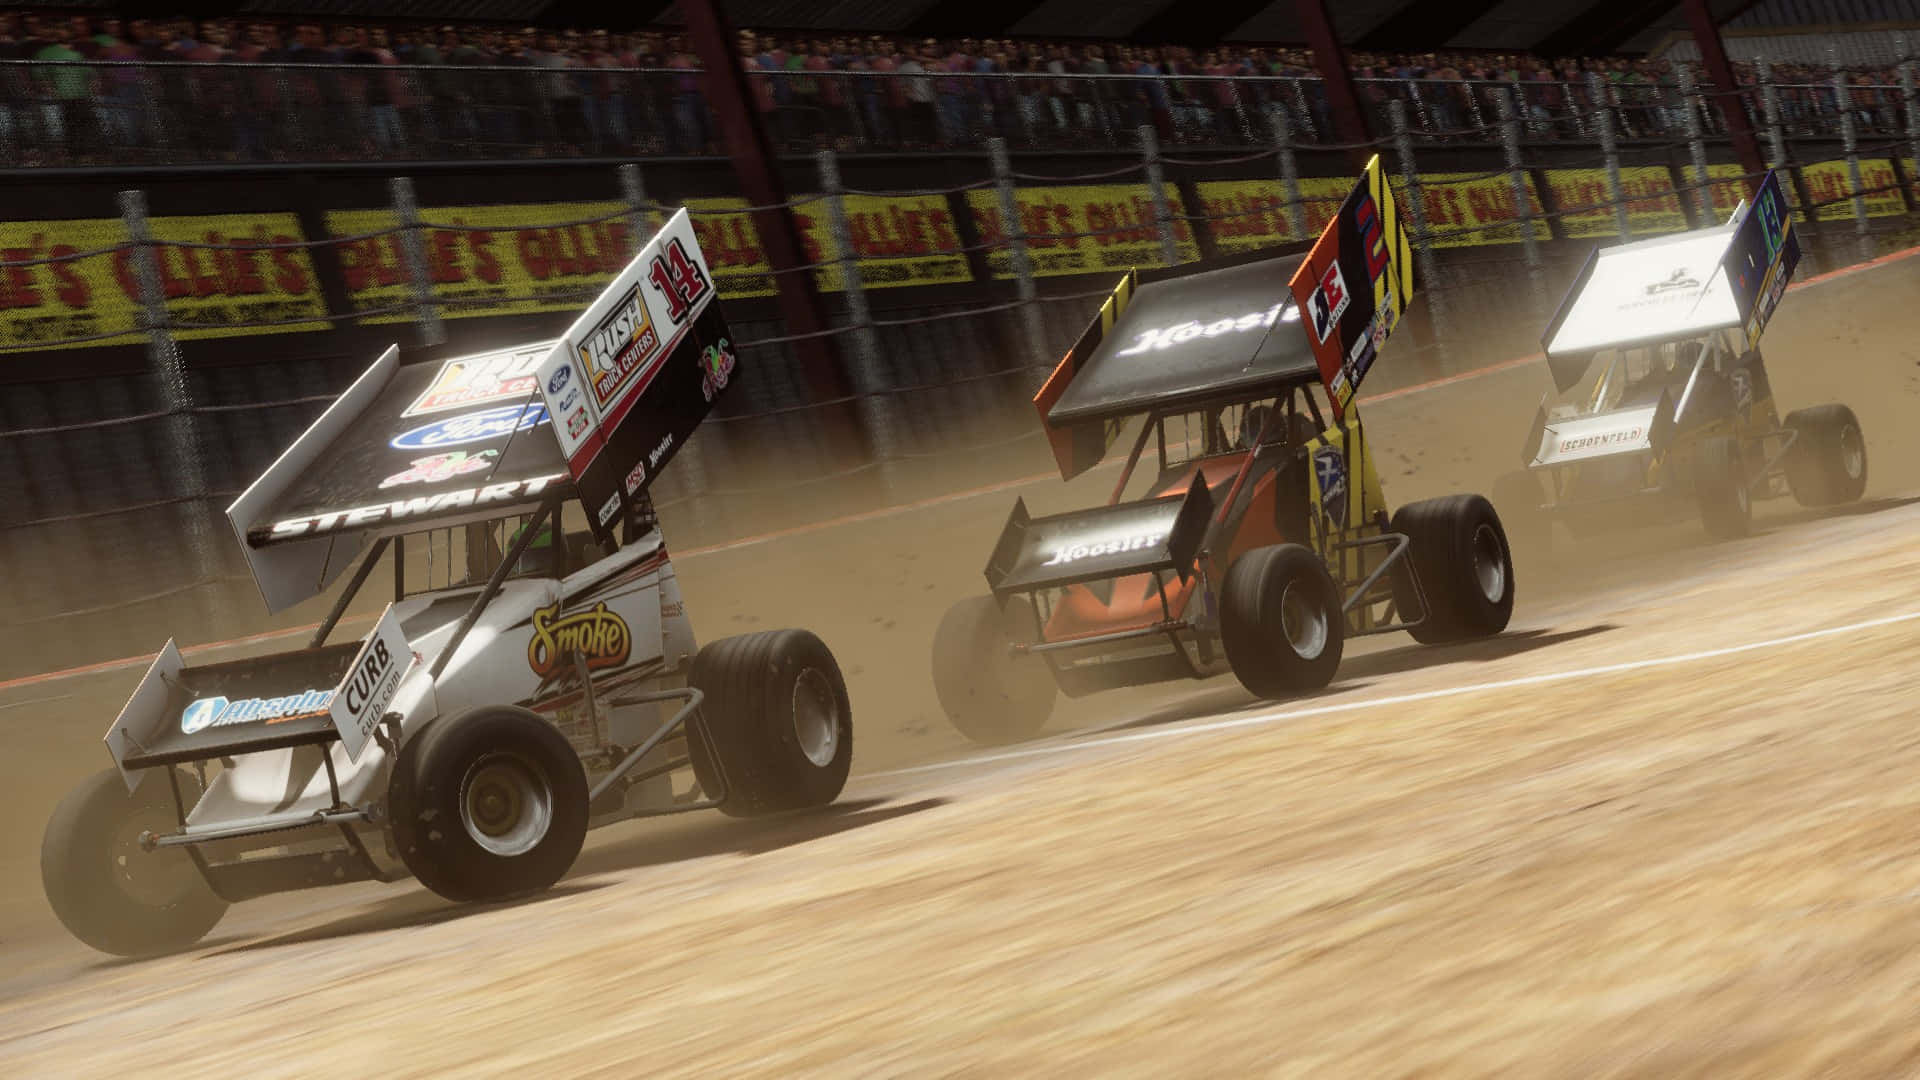 A Group Of Dirt Track Racing Cars Are Racing In A Race Wallpaper